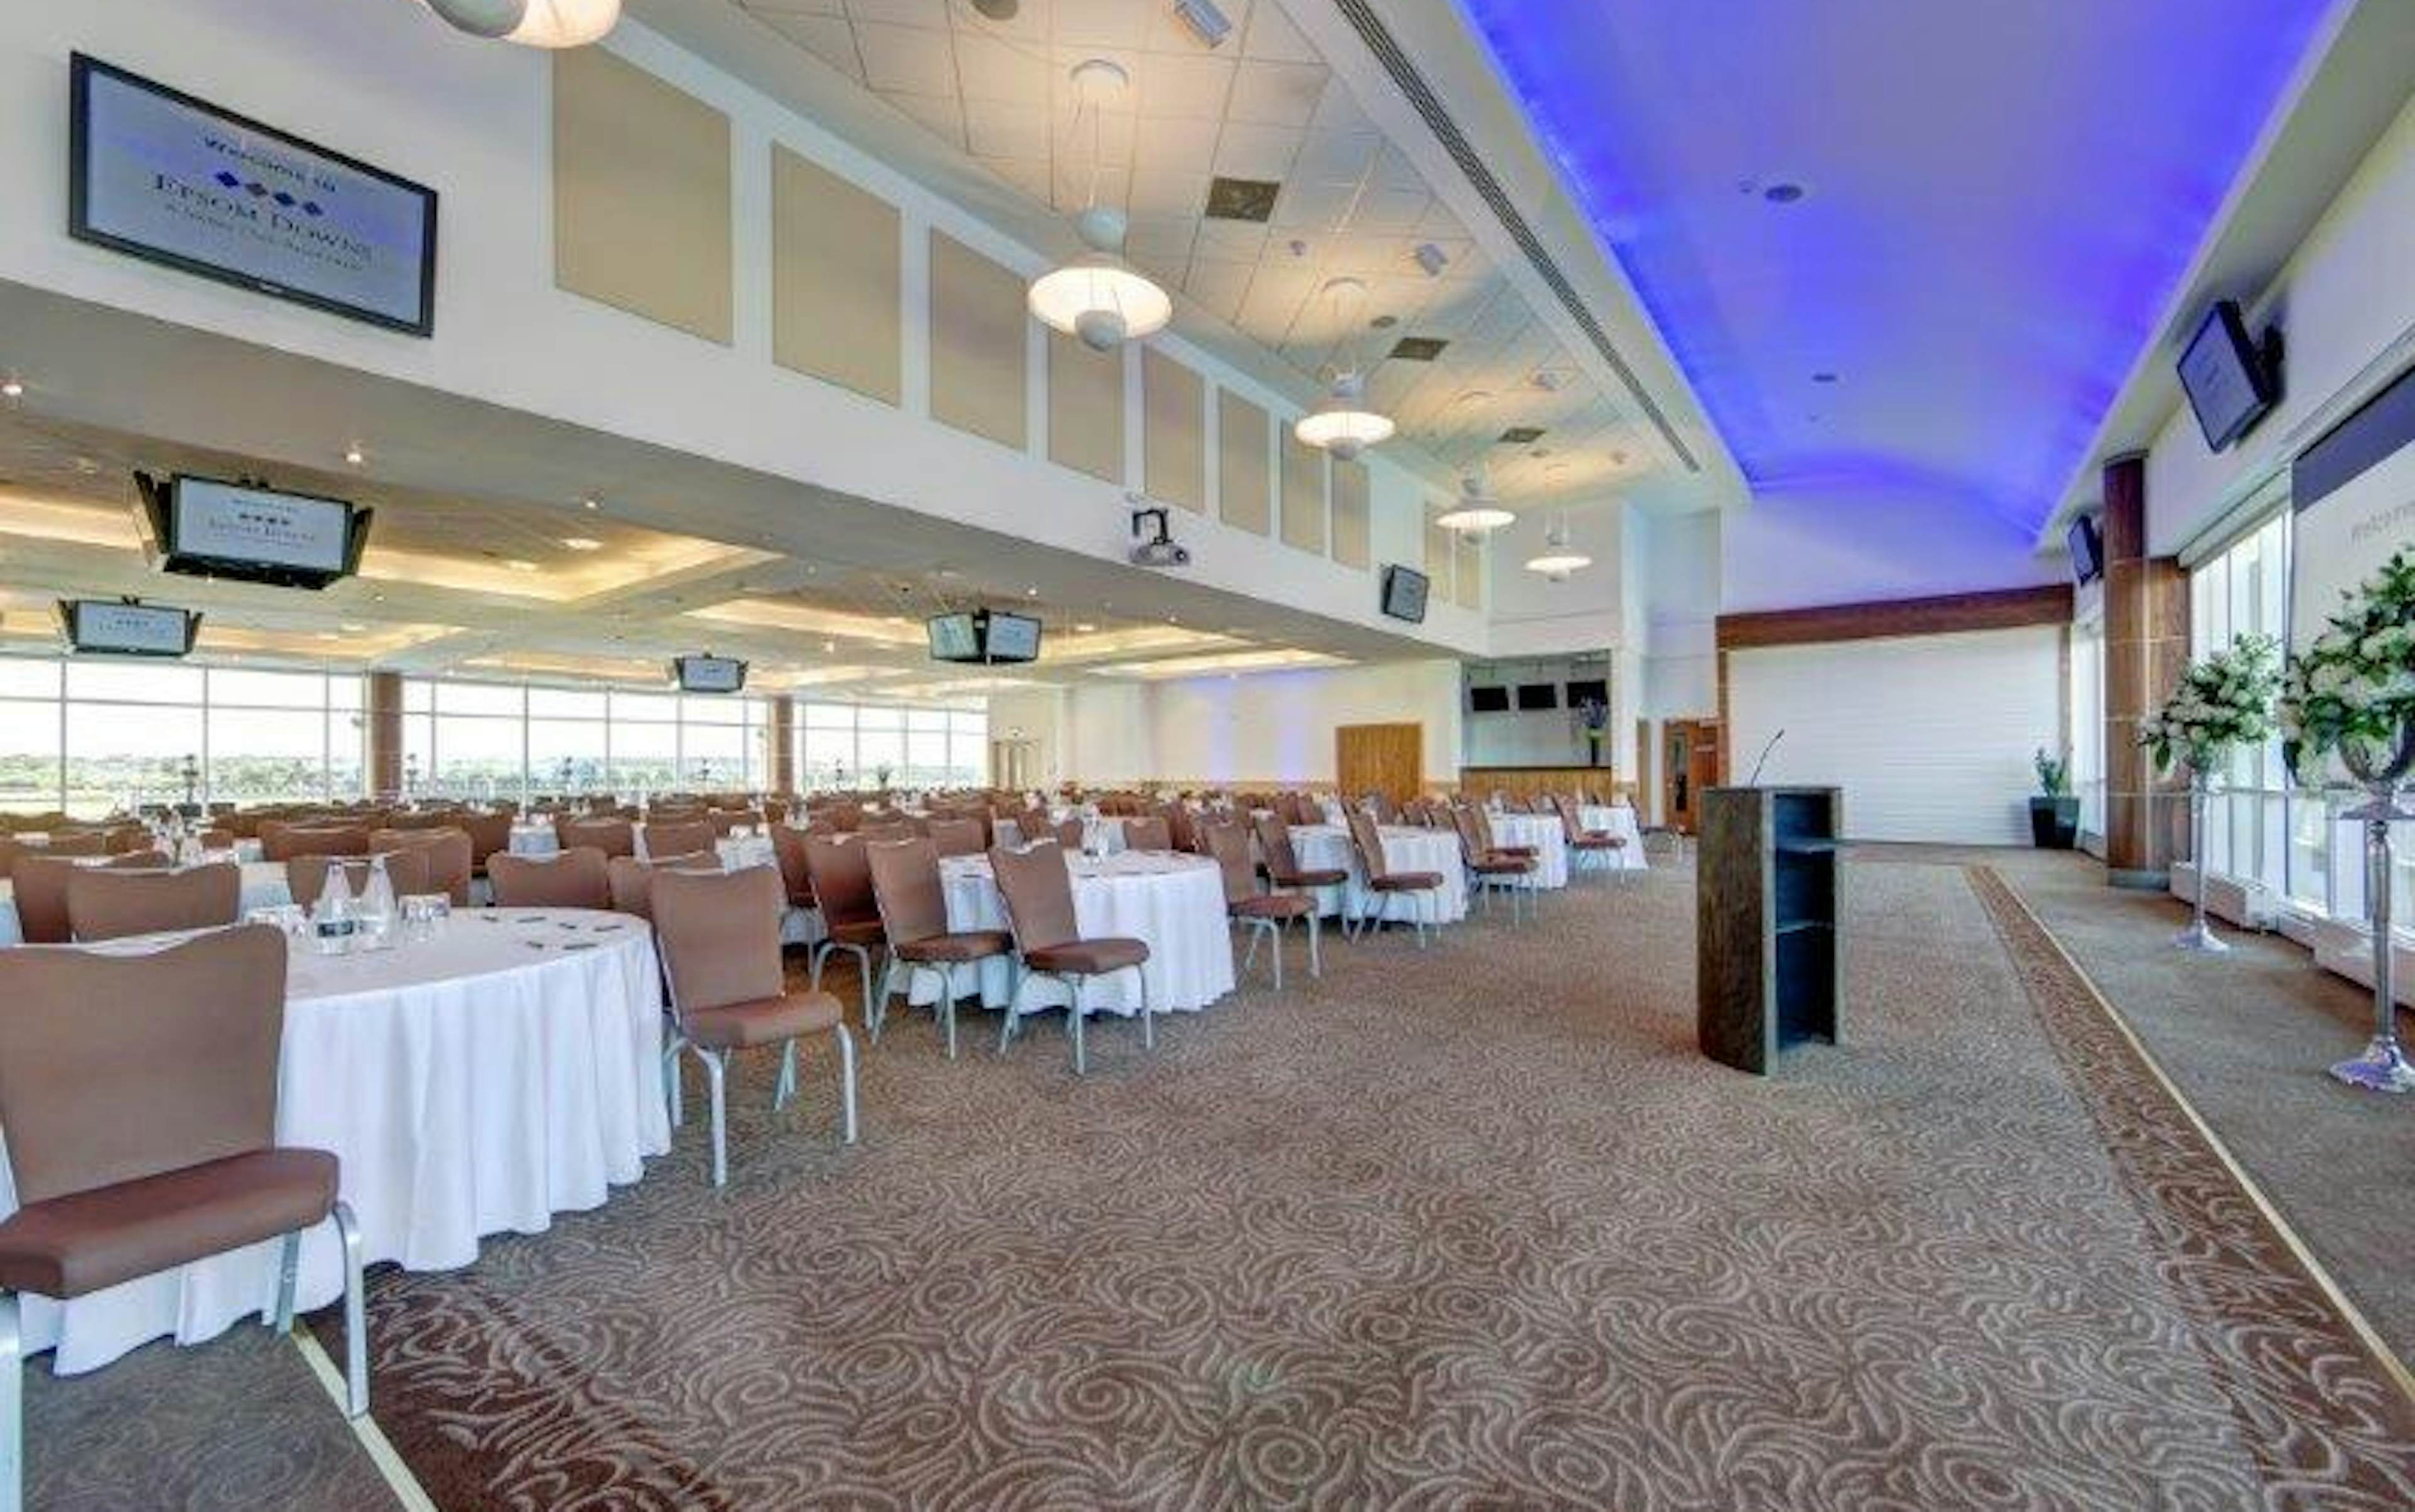 Epsom Downs Racecourse - The Diomed Suite image 1